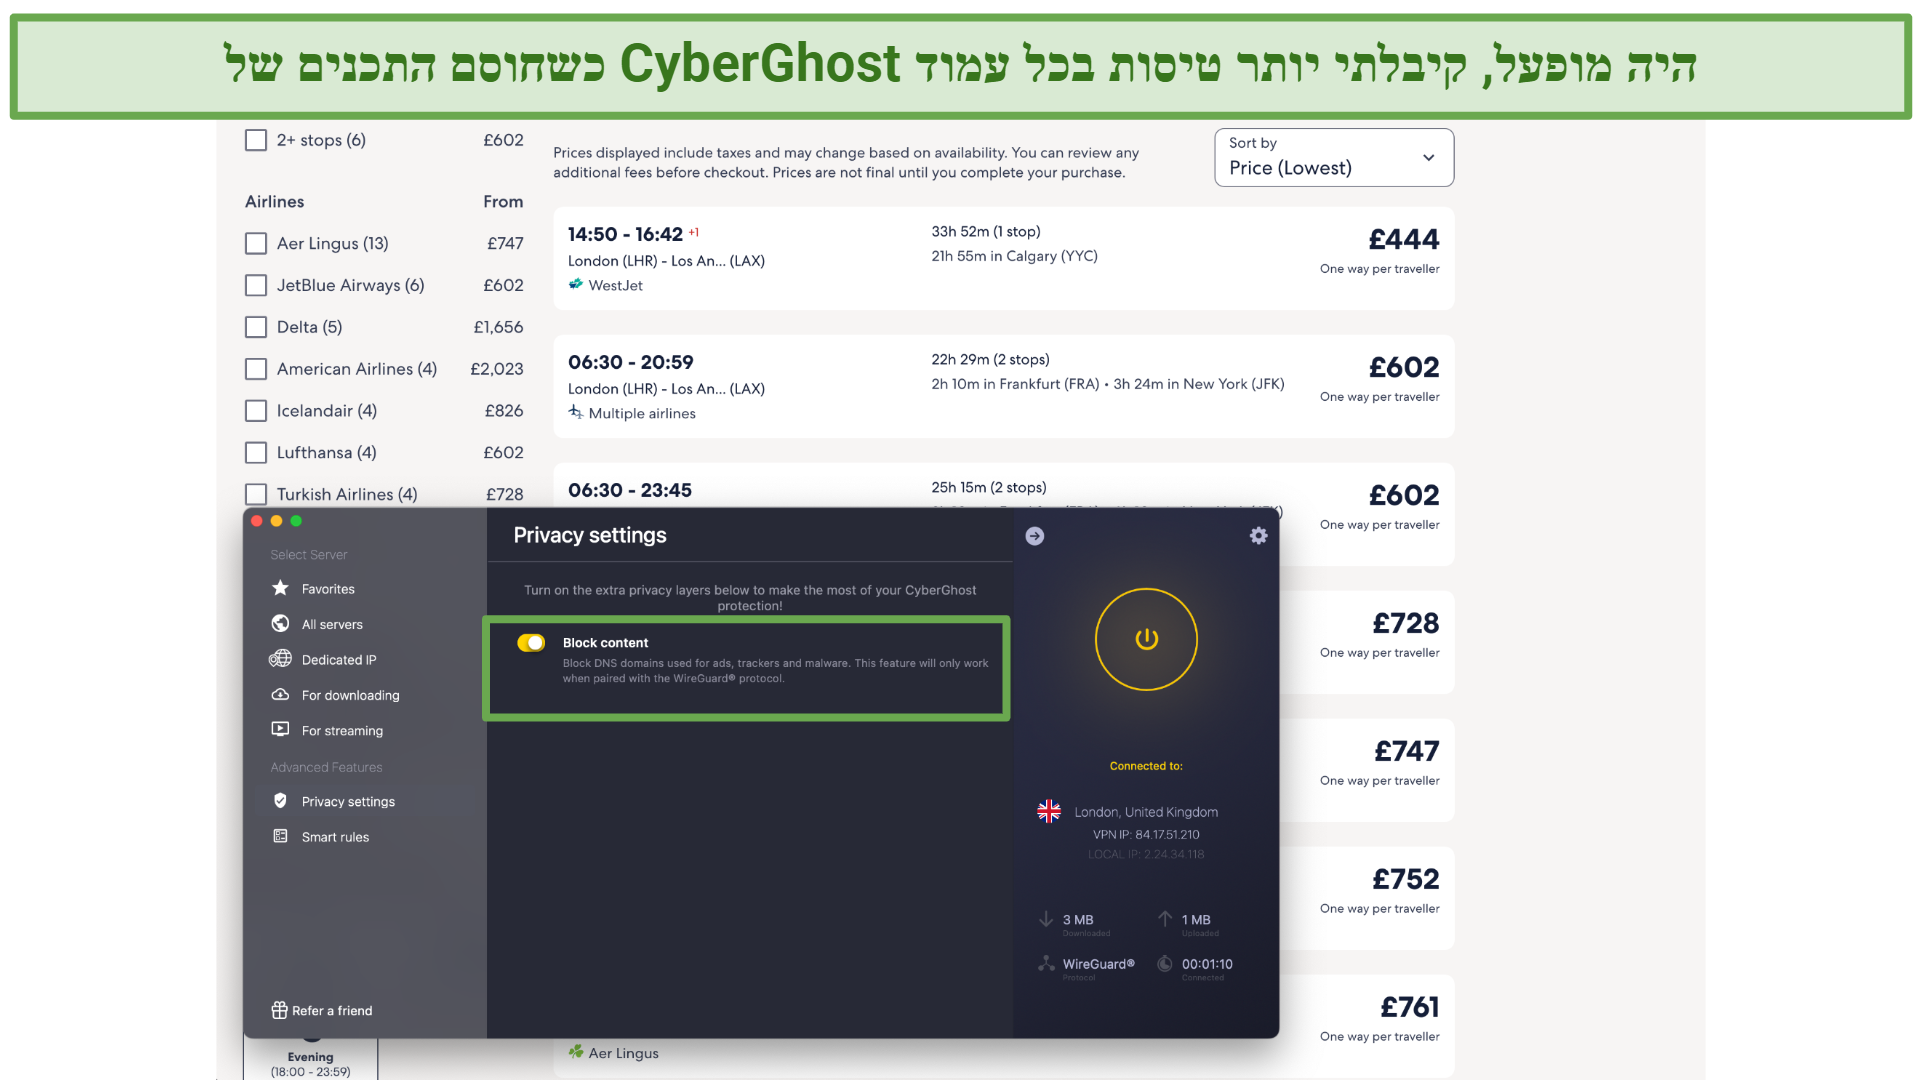 Screenshot showing the CyberGhost app with the Block content feature enabled, and no ads appearing on an Expedia flight comparison page